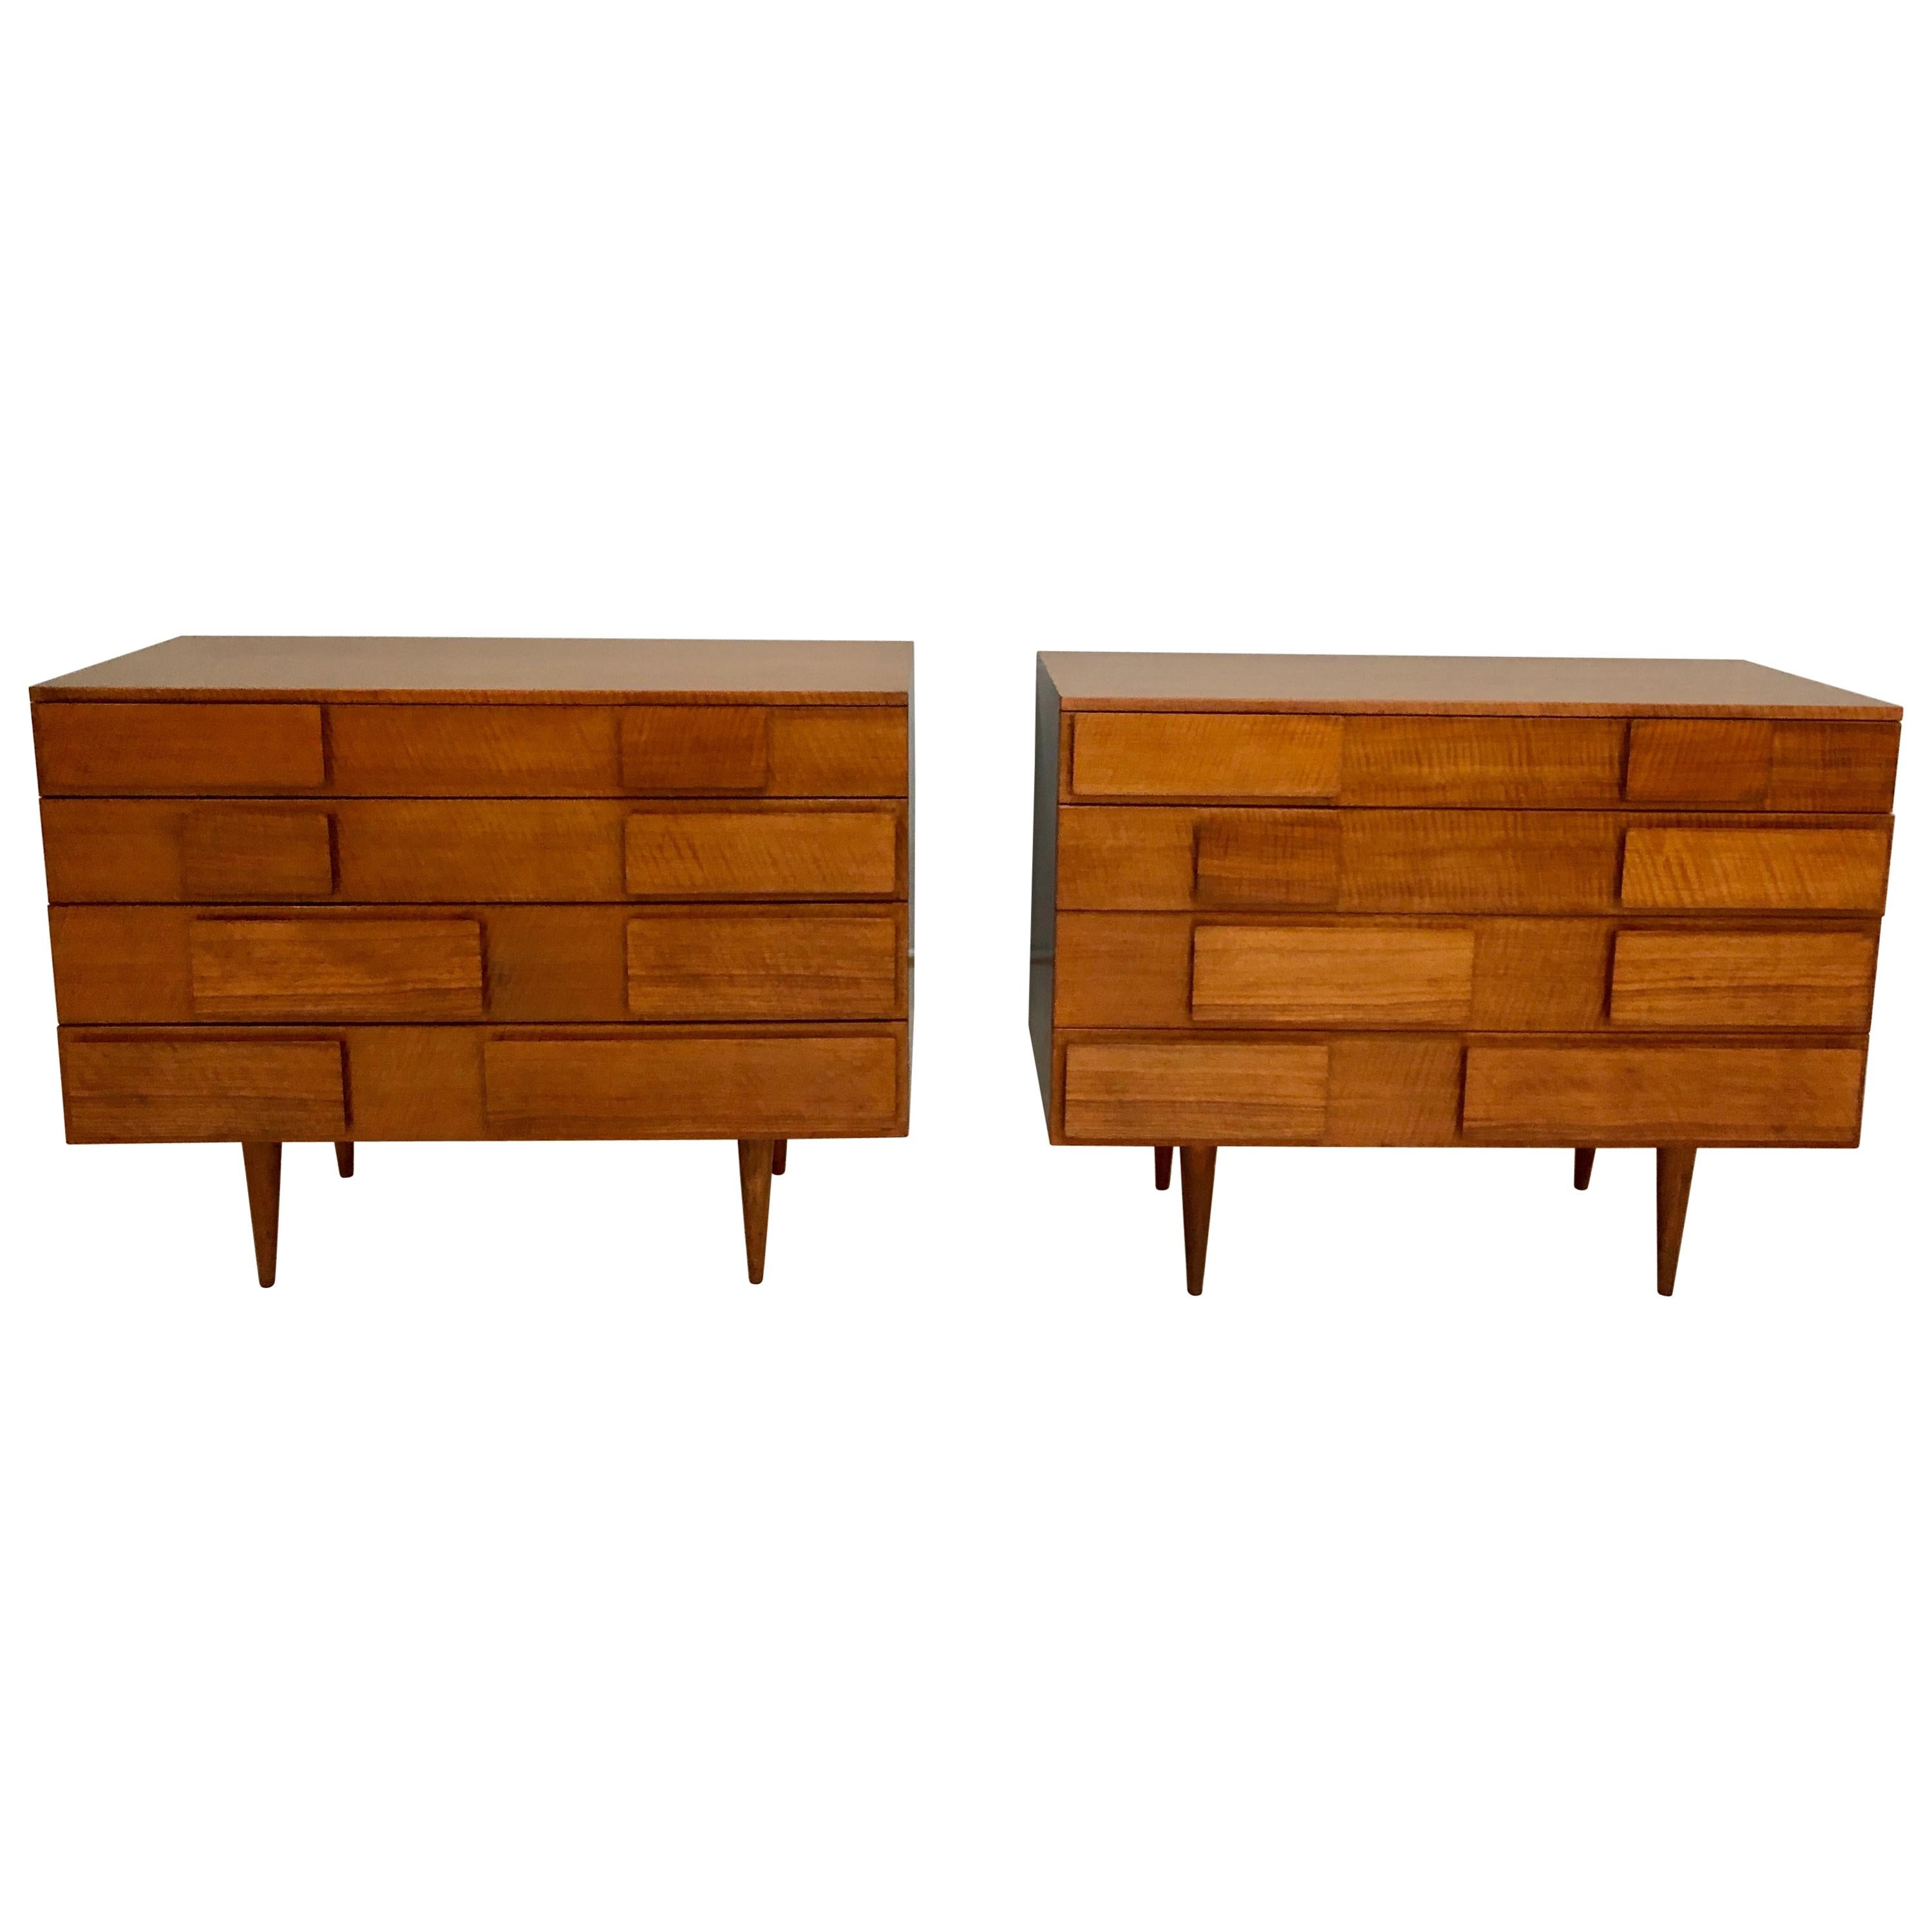 Pair of Gio Ponti Chests for Singer & Sons, Model 2129, circa 1955